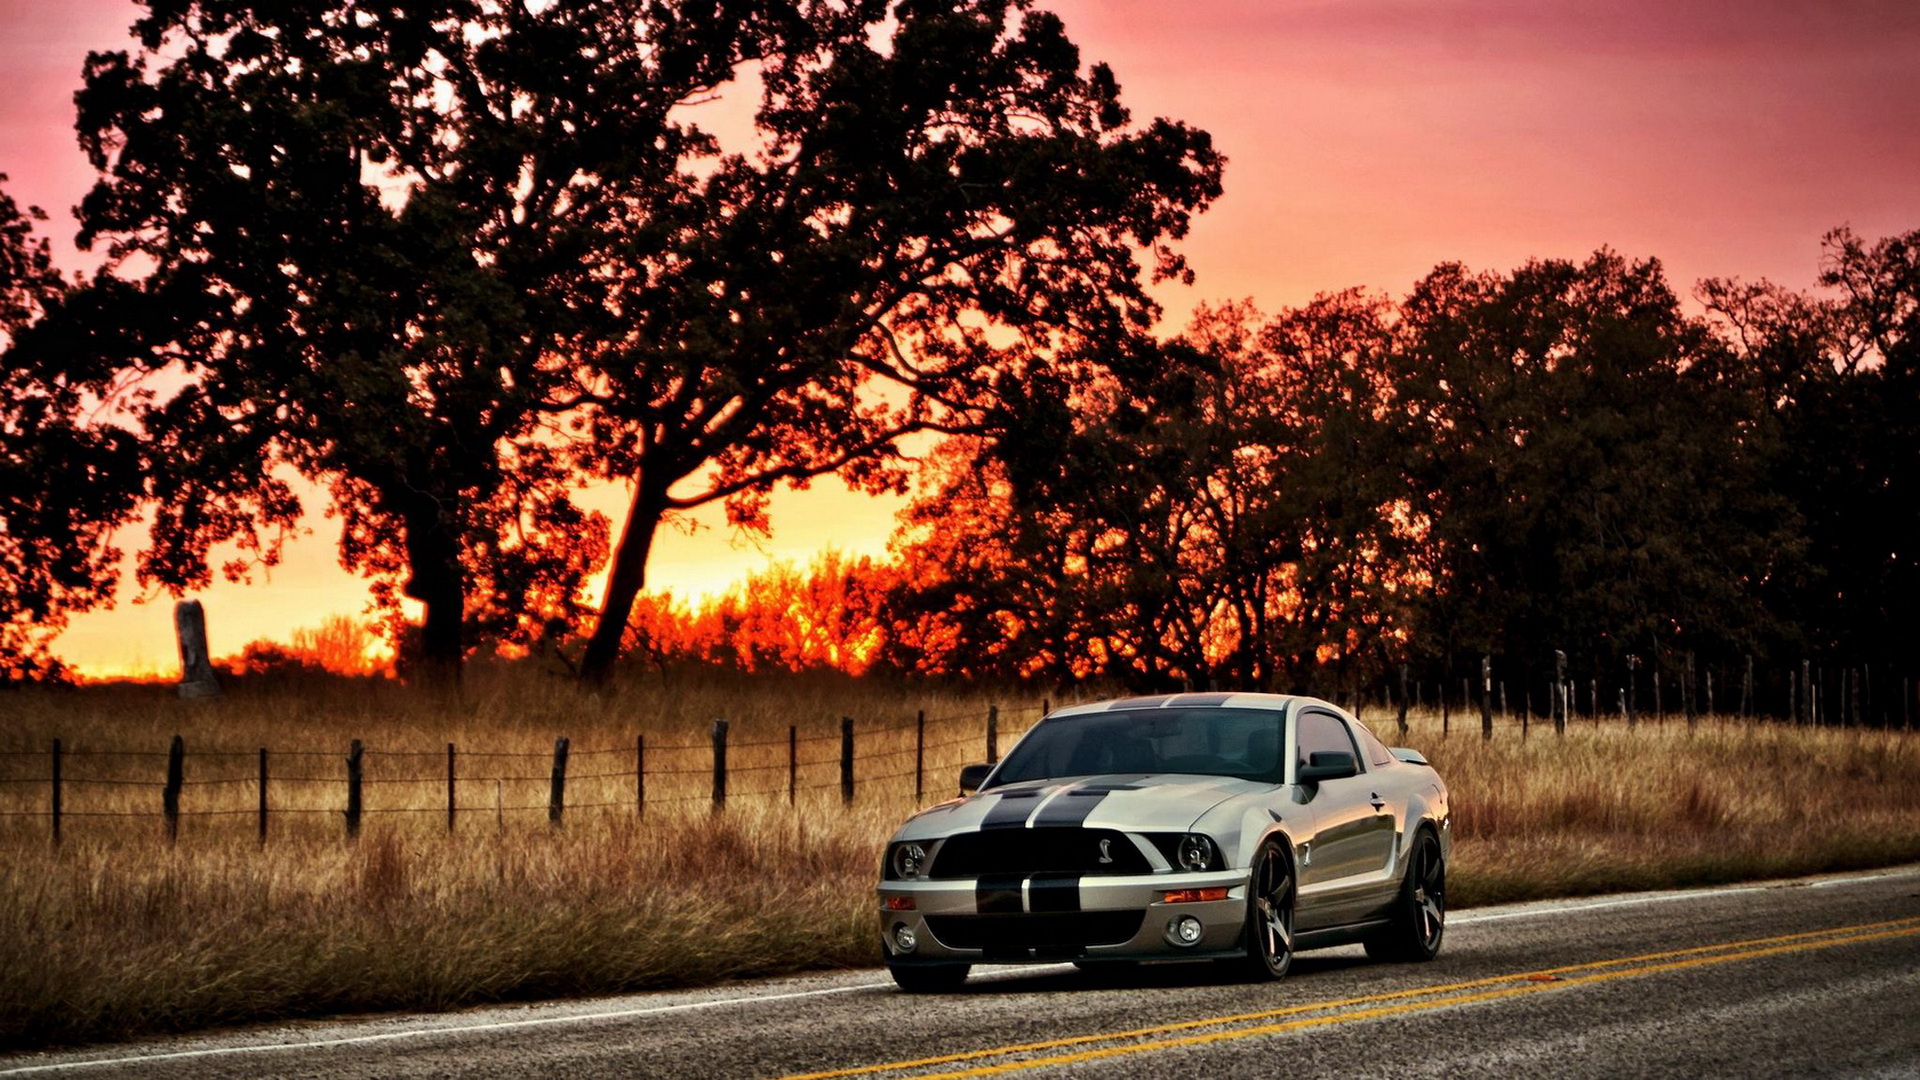 Vehicles Ford Mustang Shelby HD Wallpaper | Background Image